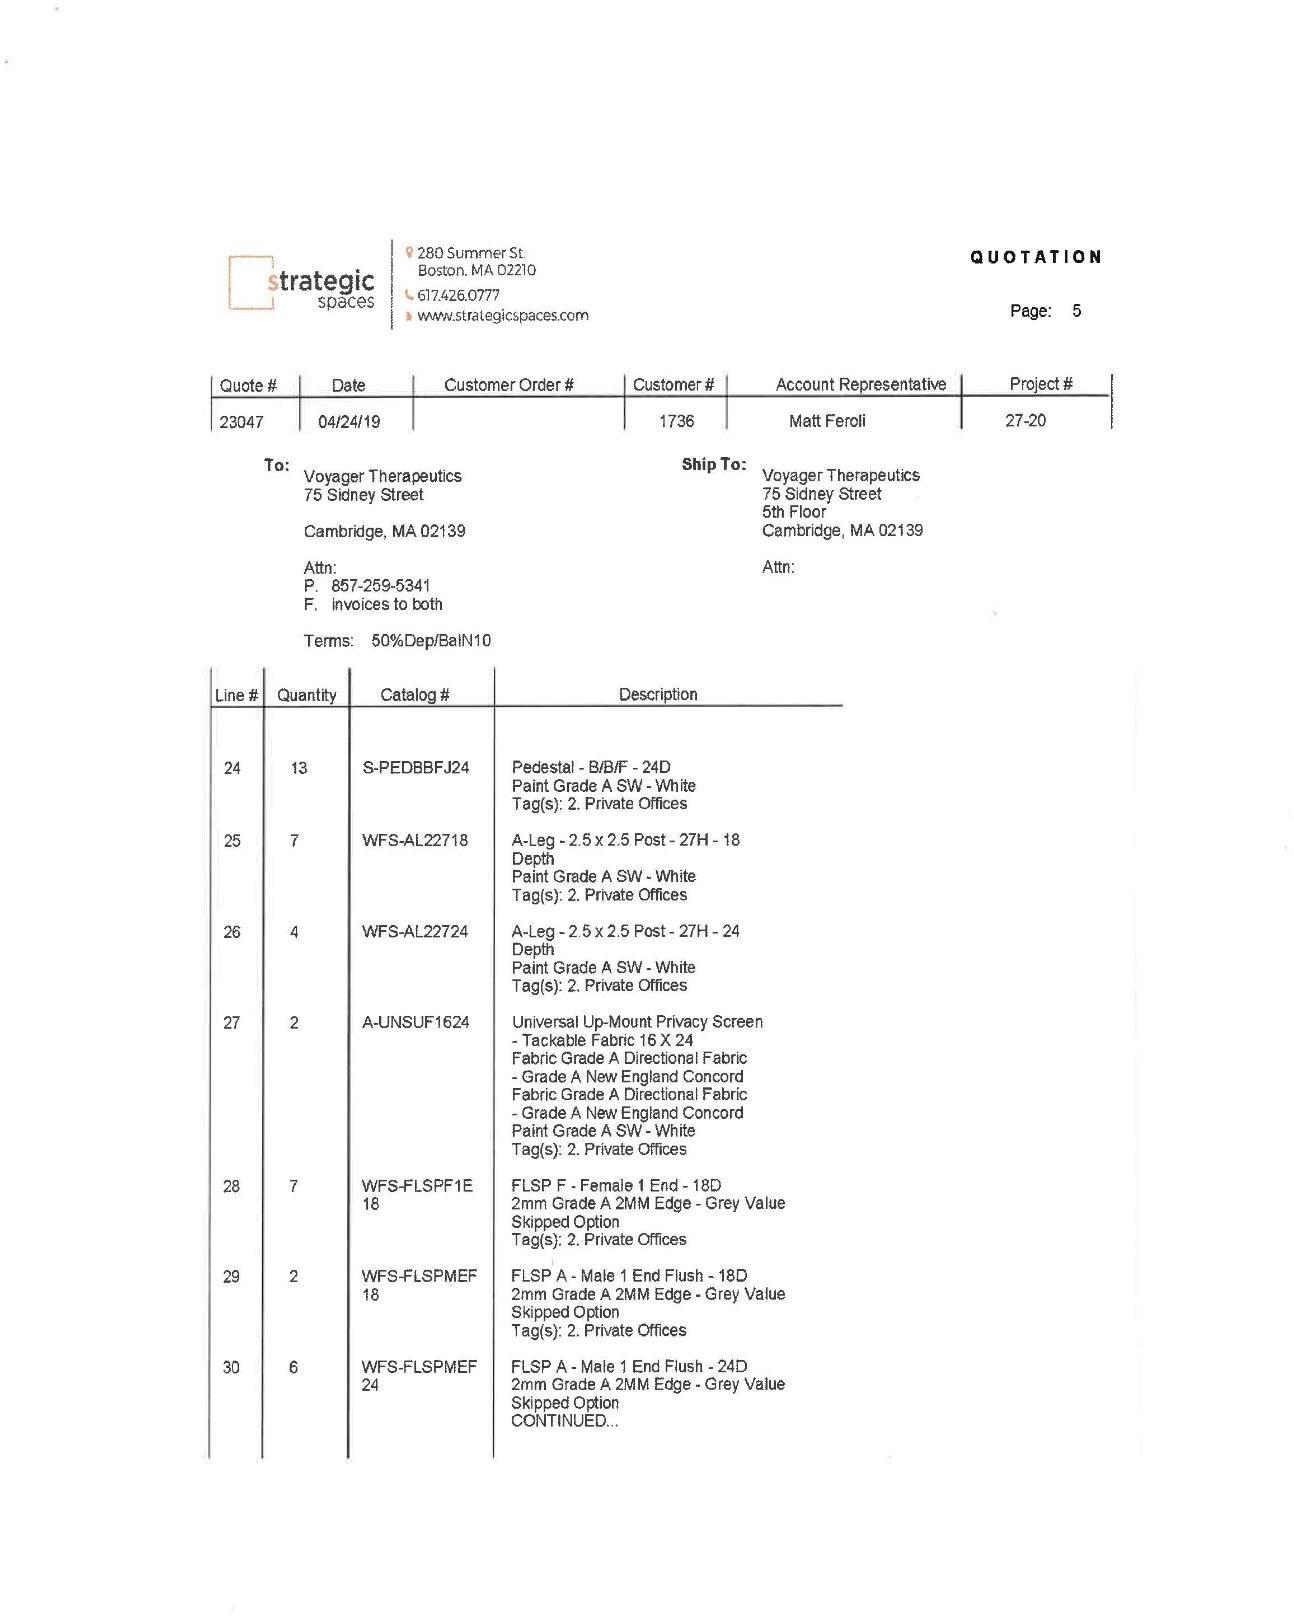 Ex C to Voyager BioNTech Sublease Agreement_Page_05